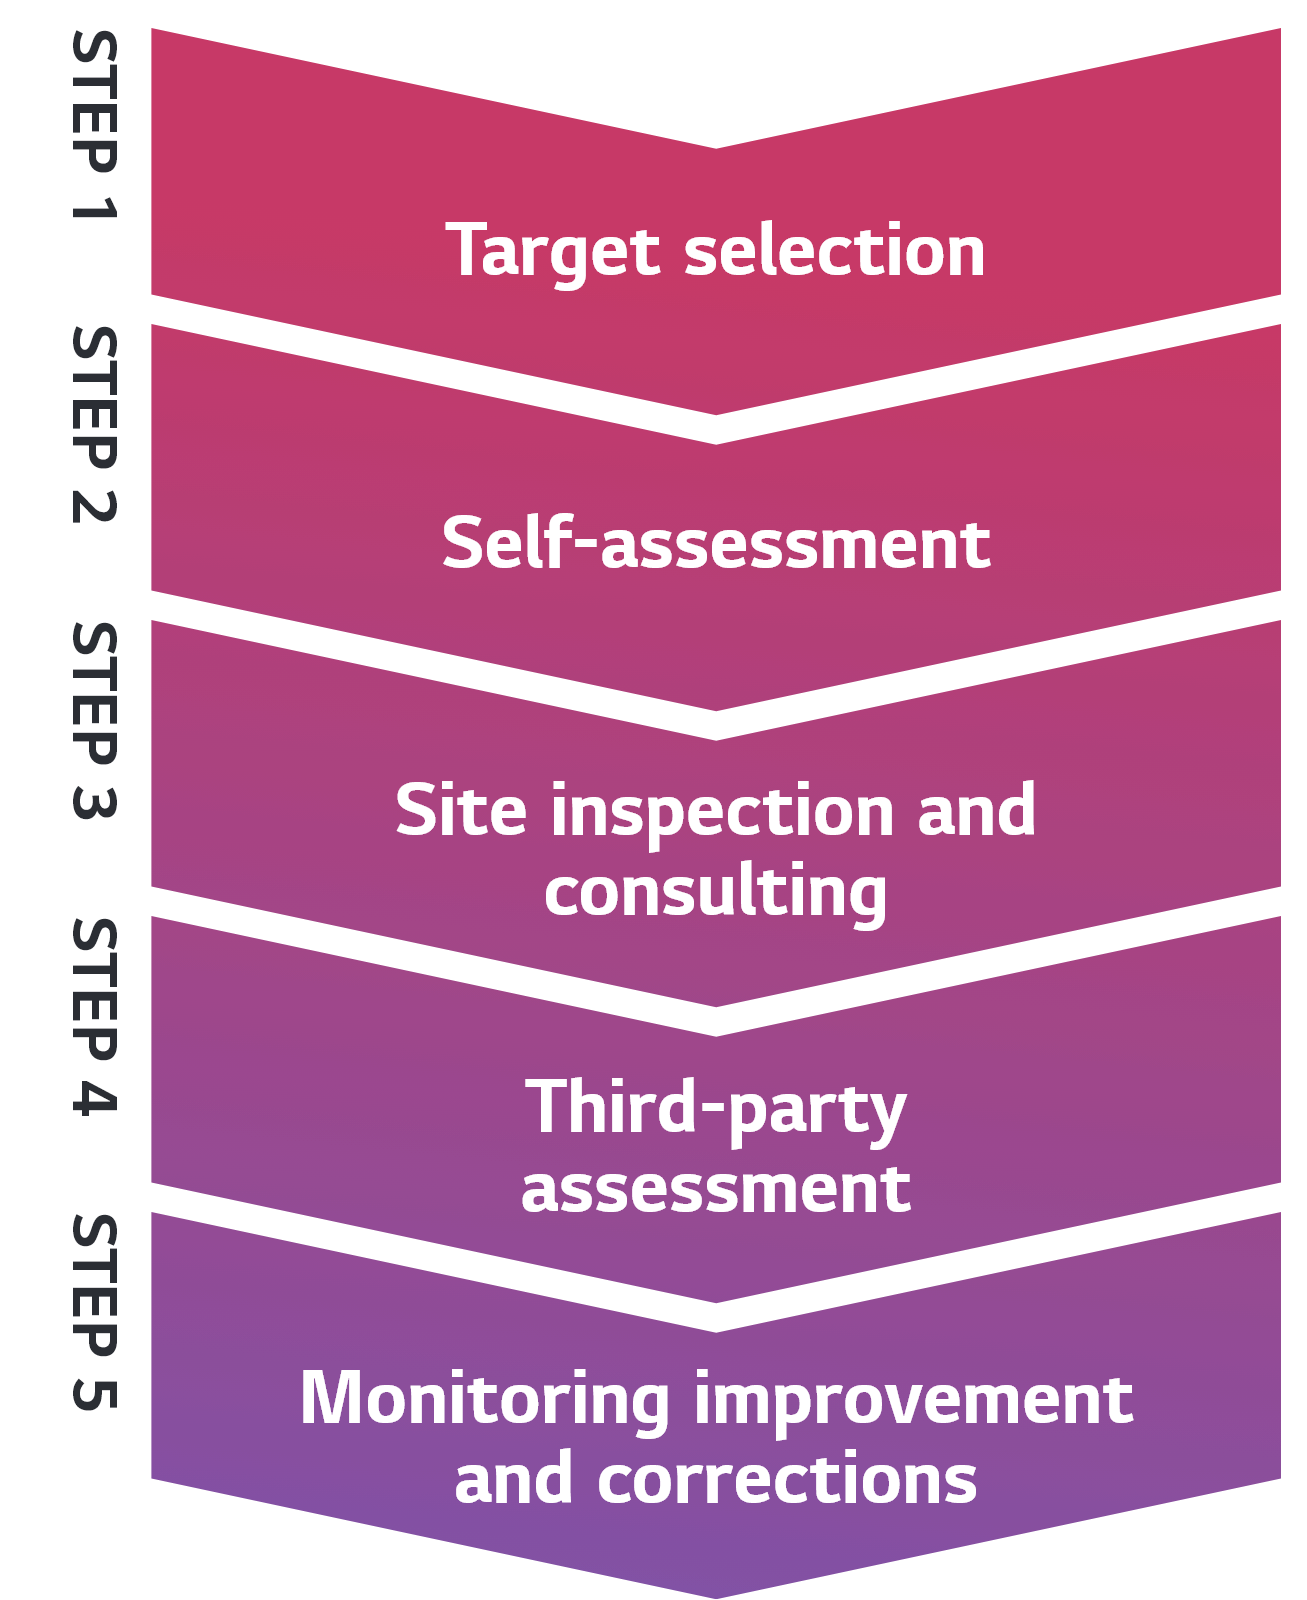 (STEP 1)Target selection → (STEP 2)Self-assessment → (STEP 3)Site inspection and consulting → (STEP 4)Third-party assessment → (STEP 5)Monitoring improvement and corrections